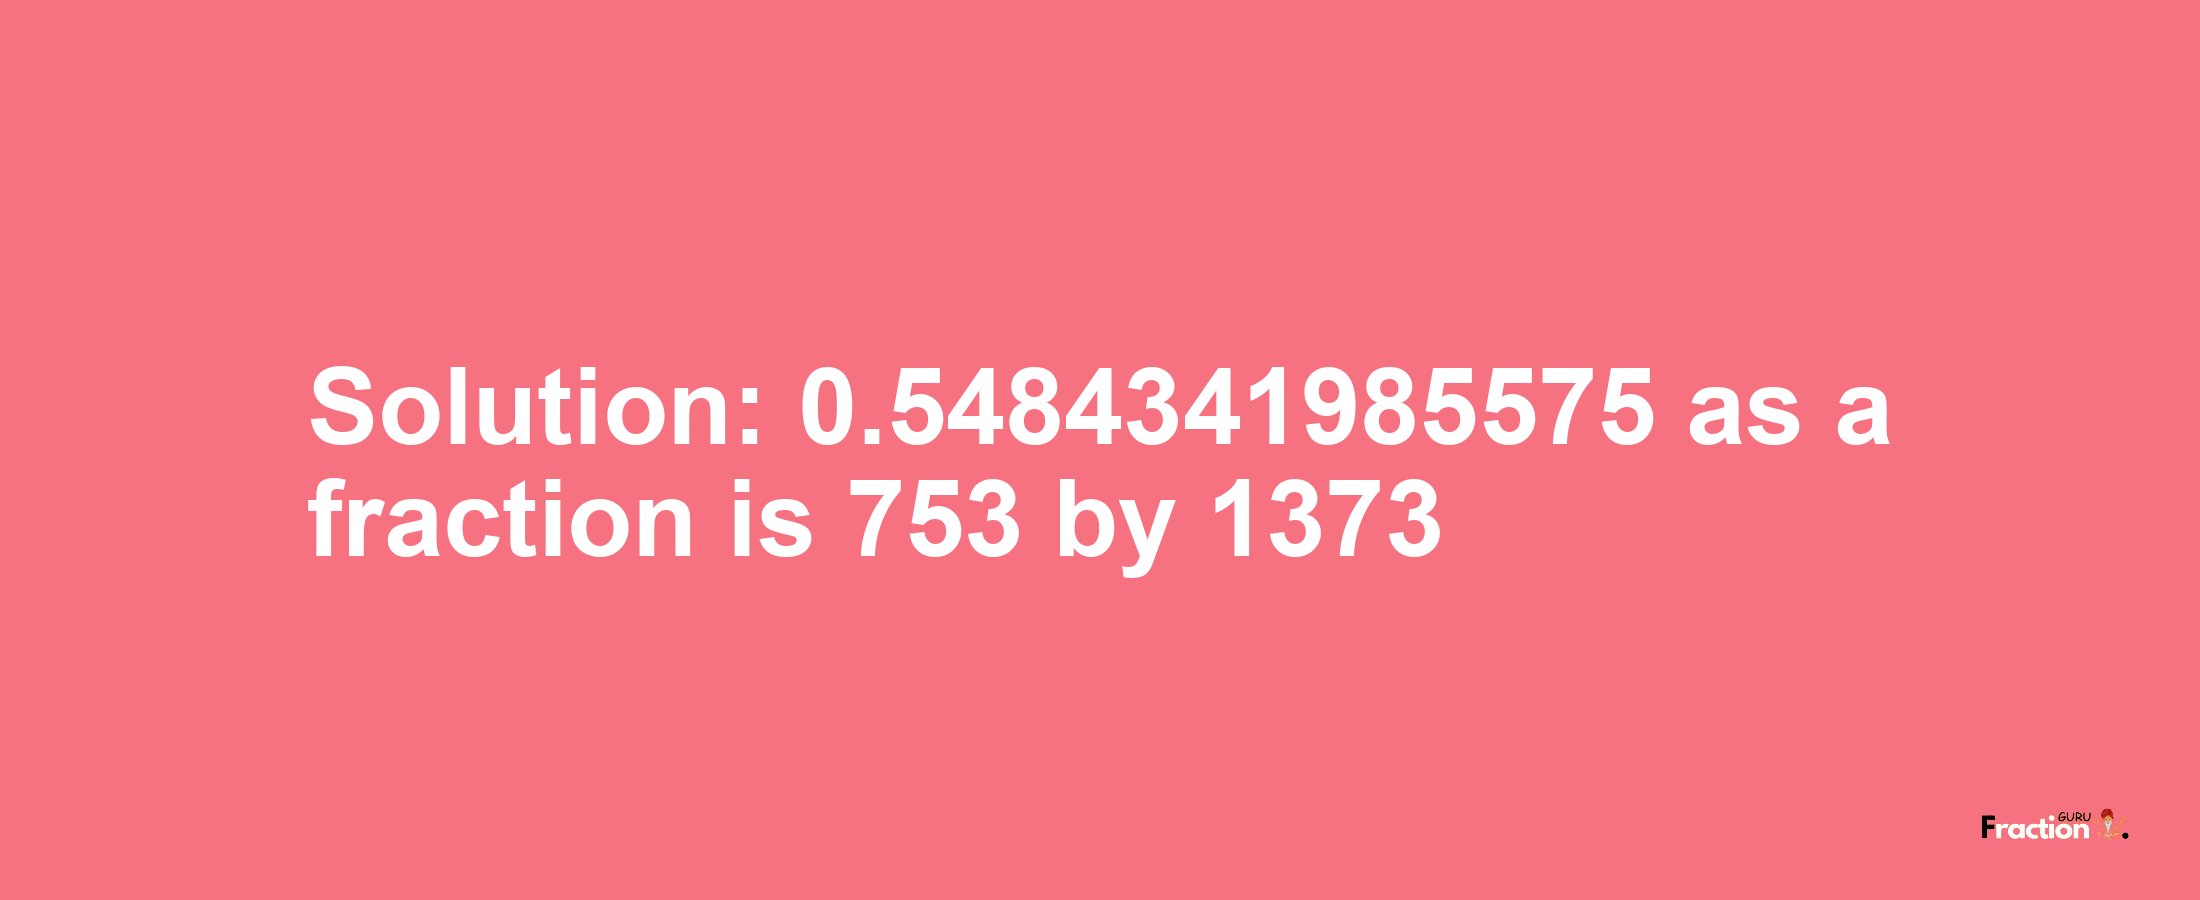 Solution:0.5484341985575 as a fraction is 753/1373